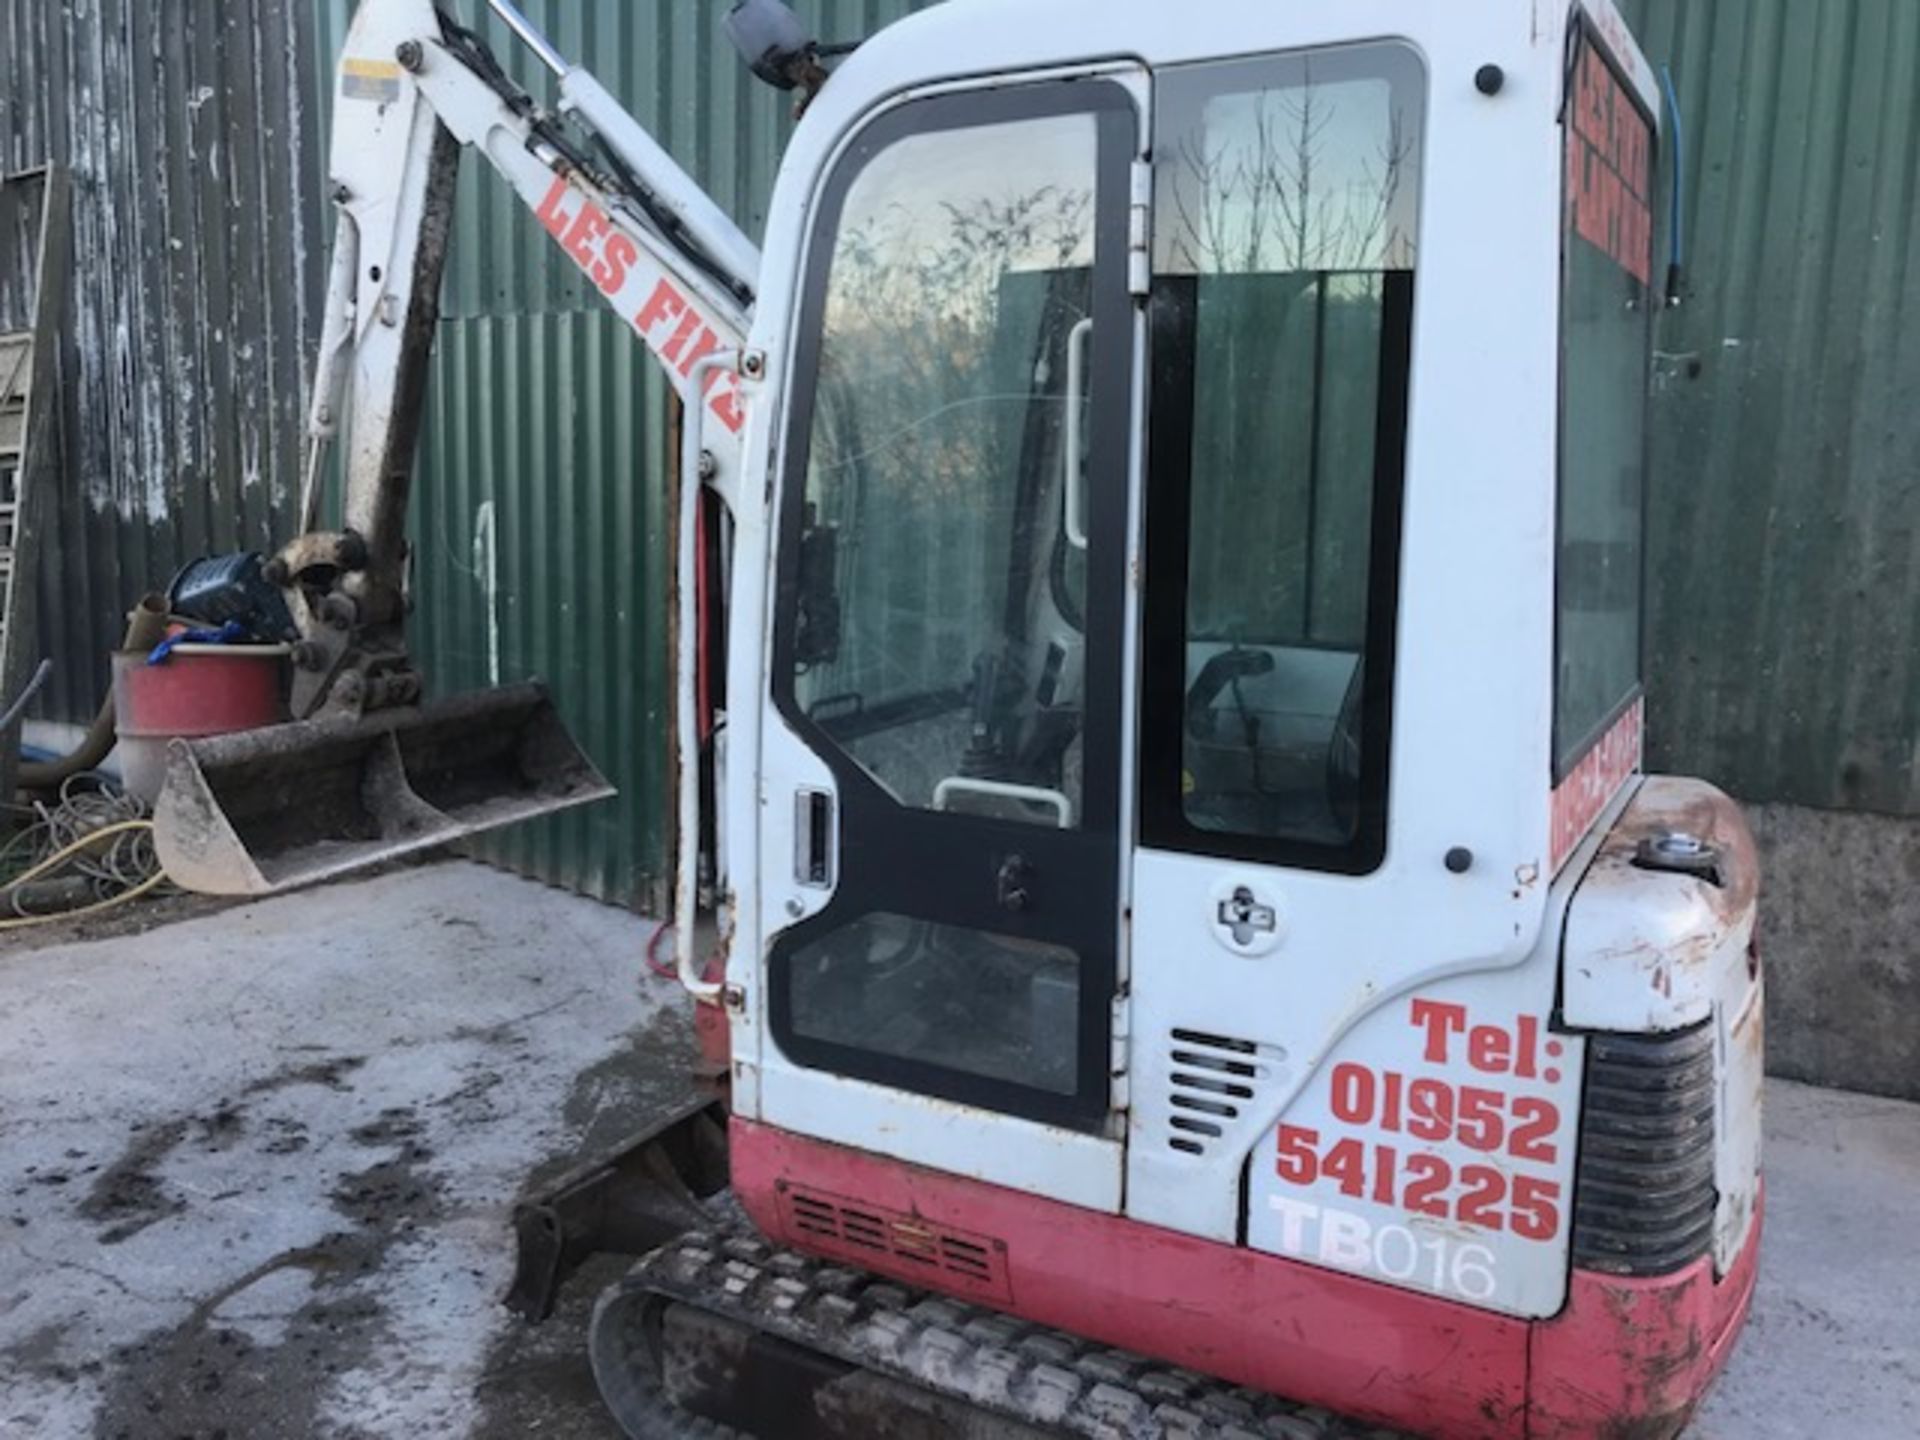 TAKEUCHI TBO16 MINI DIGGER C/W QUICK HITCH AND BUCKET - Image 2 of 7